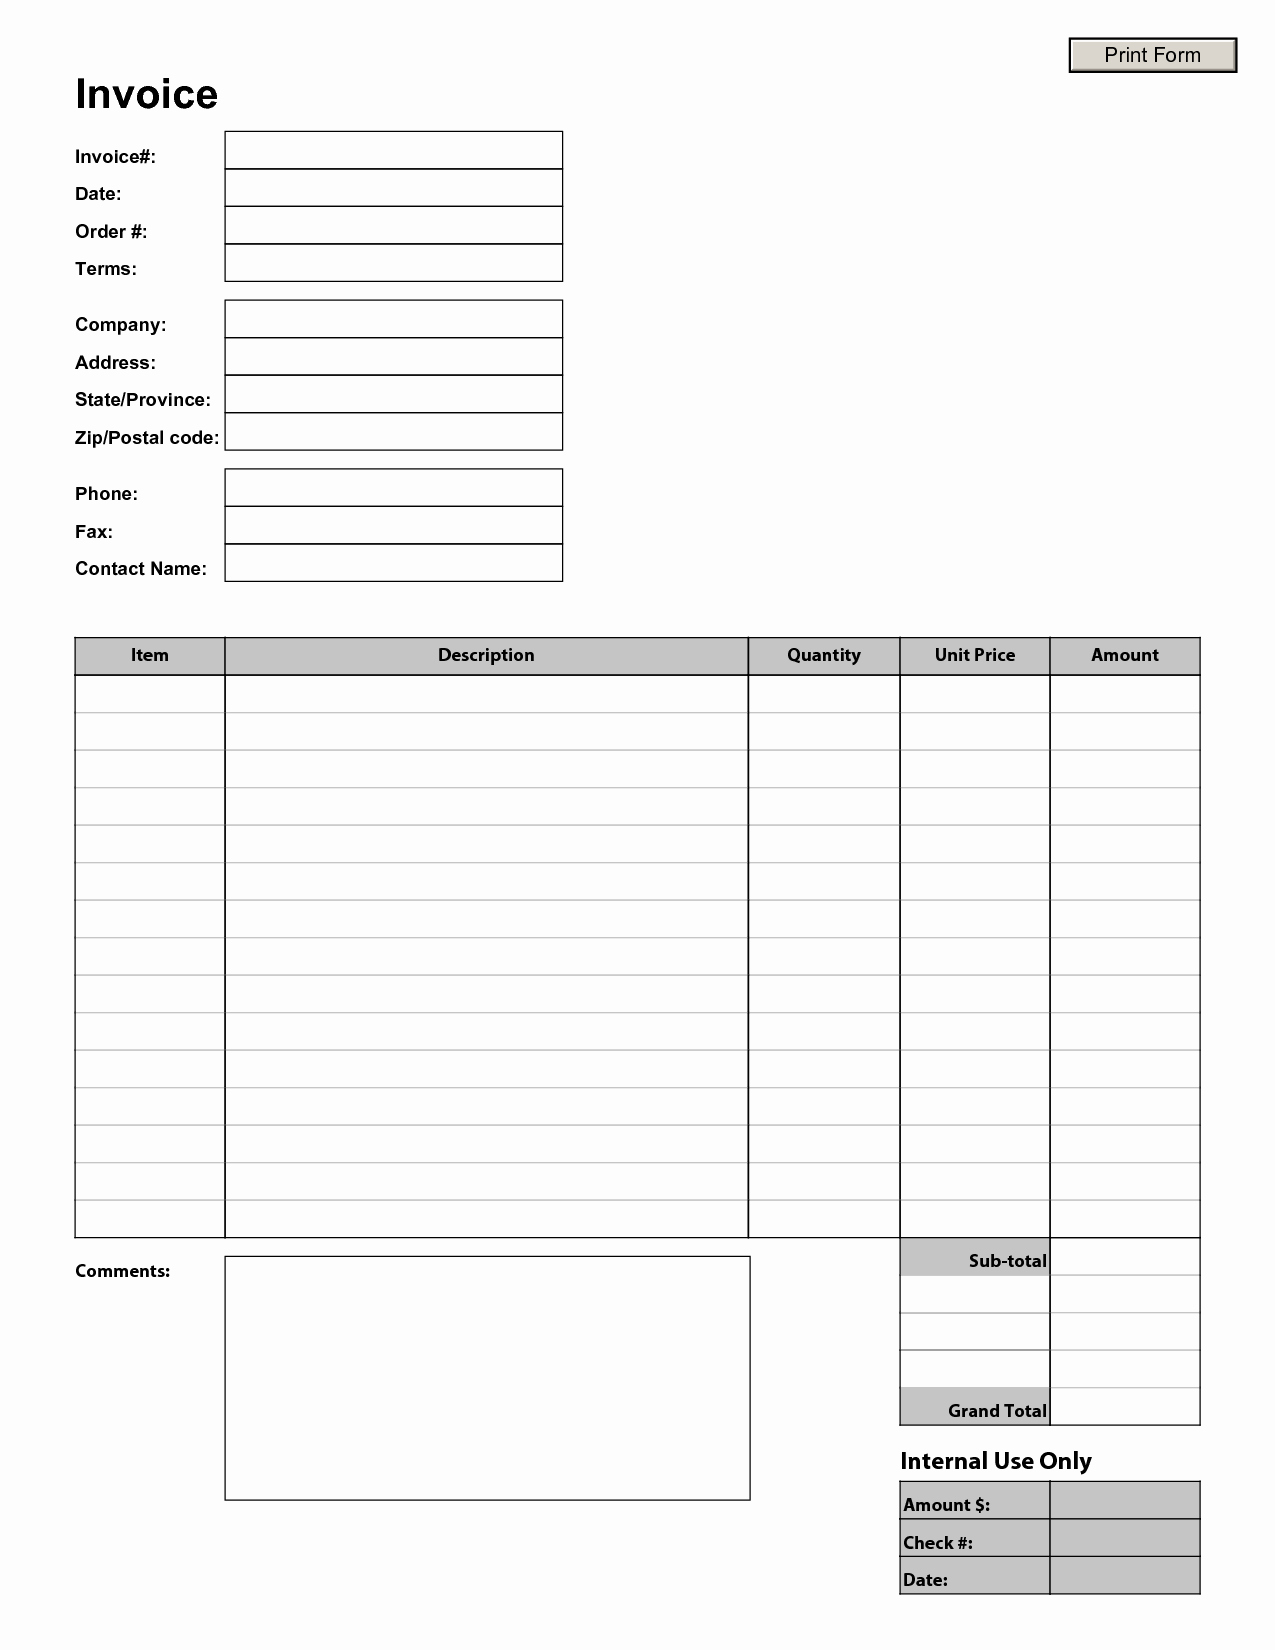 Free Templates for Invoices Printable New Free Printable Invoice Template Uk